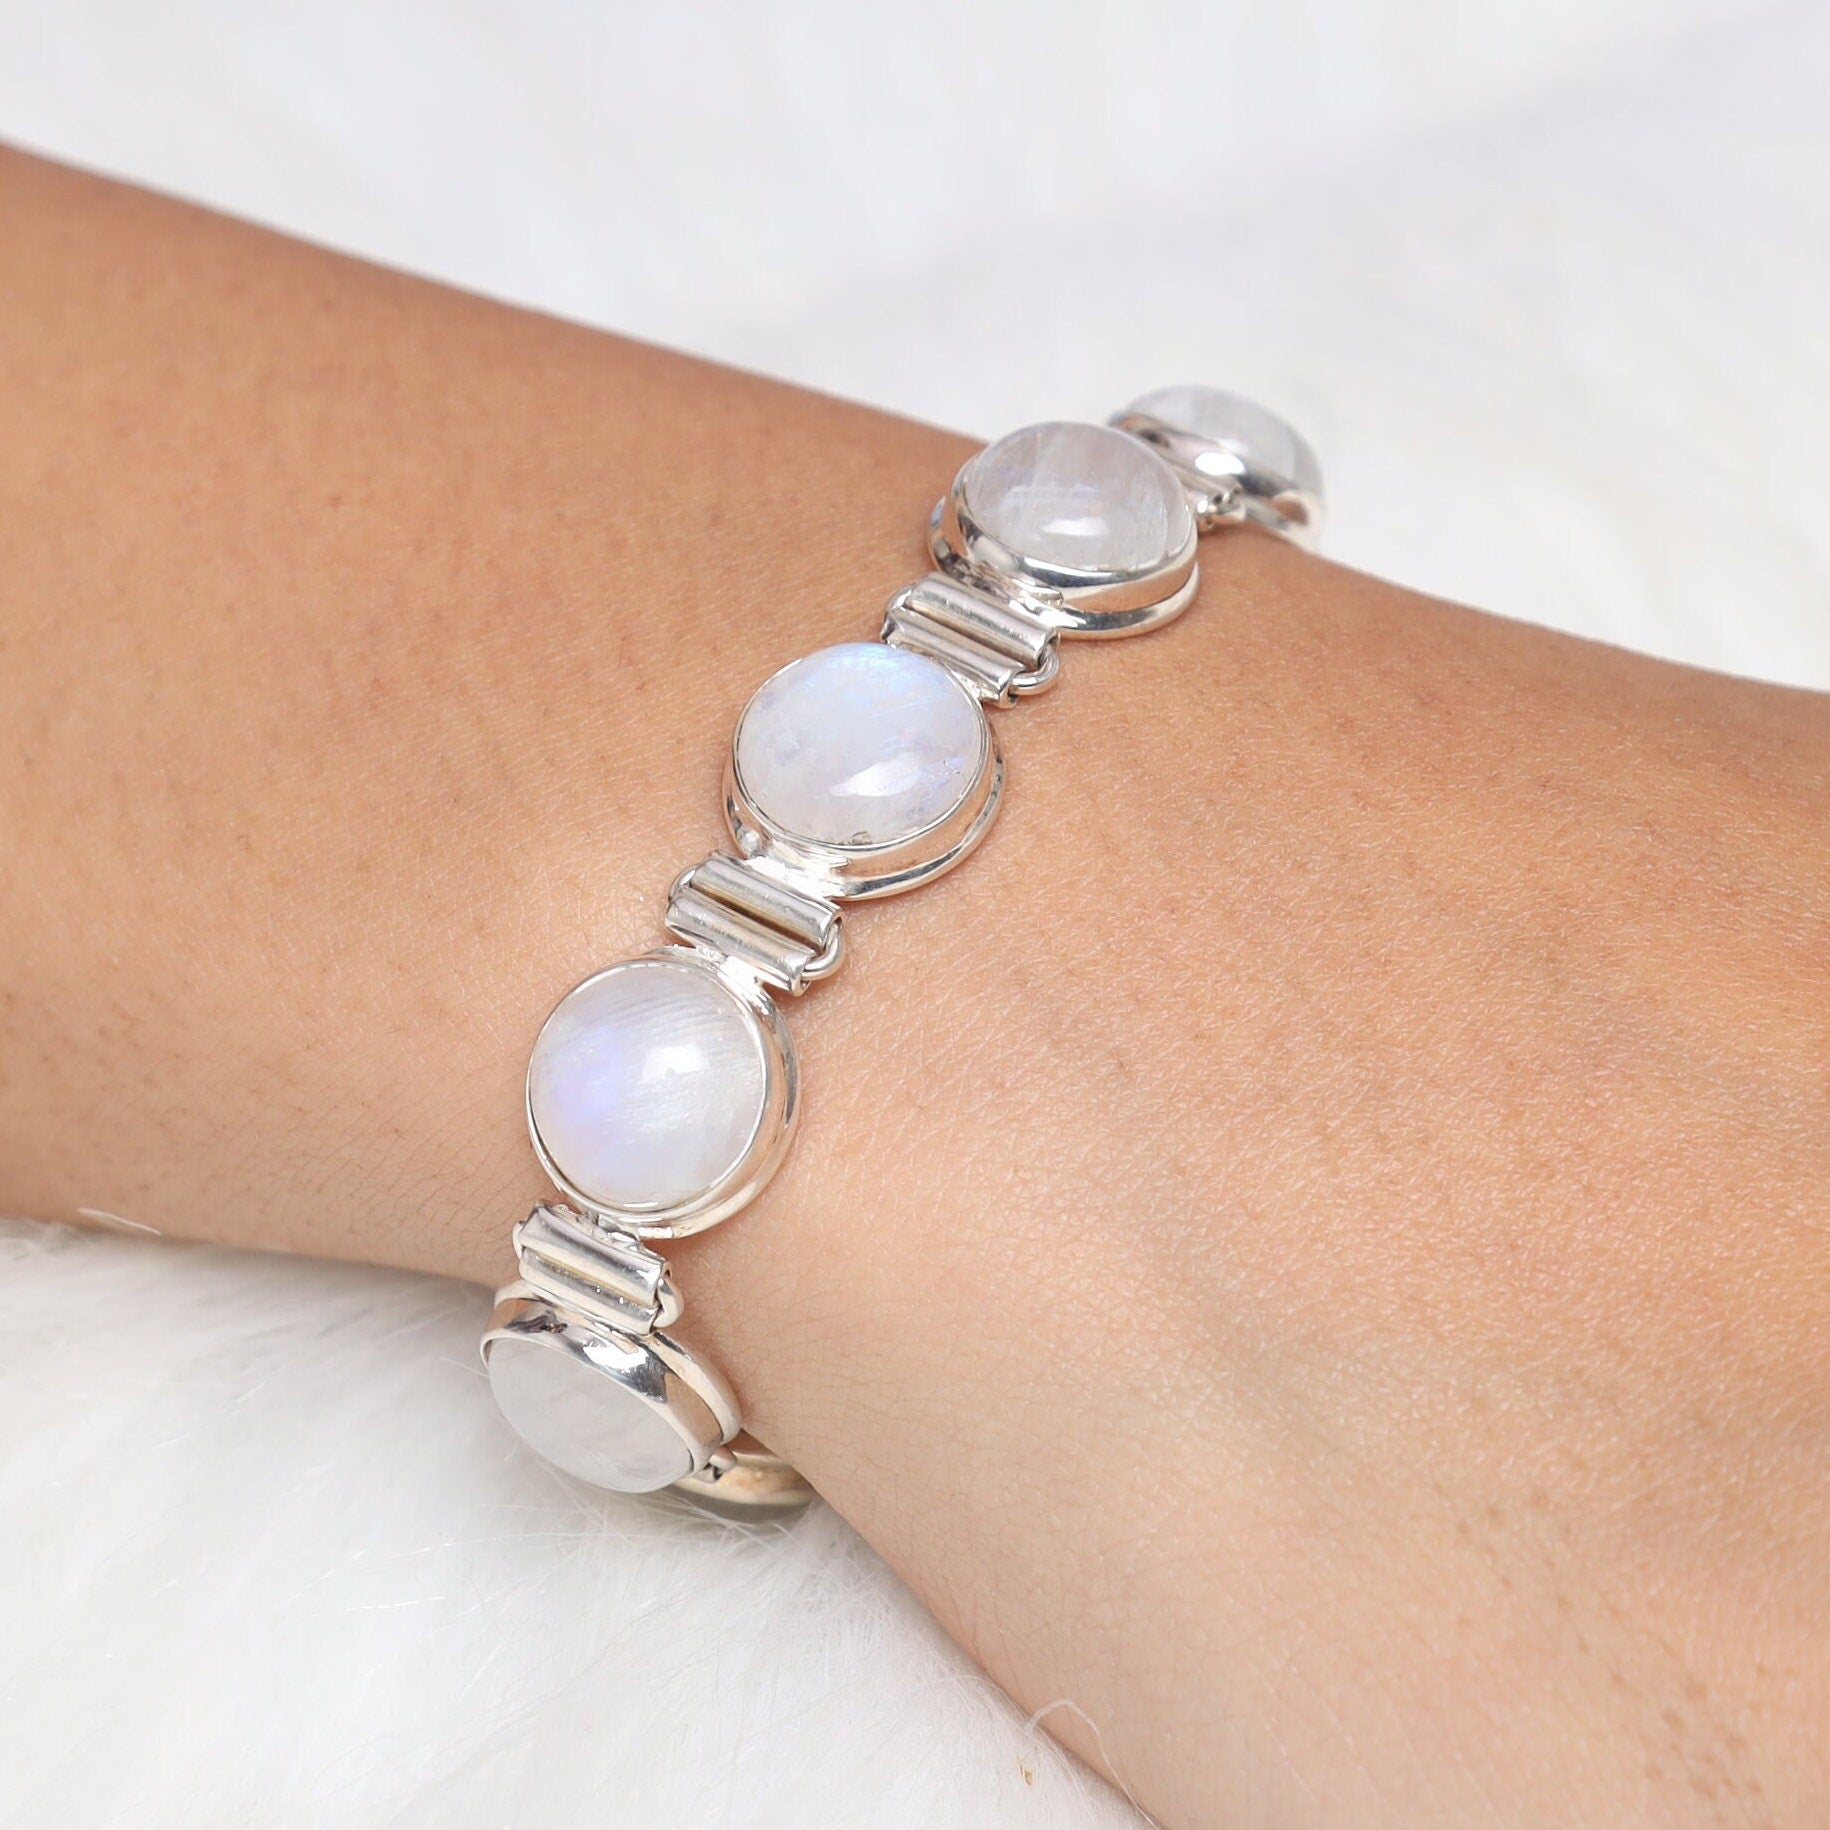 Rainbow Moonstone Bracelet, 925 Sterling Silver Bracelet, June Birthstone, Round Gemstone Bracelet, Handmade Jewelry, Wedding Gift for Her